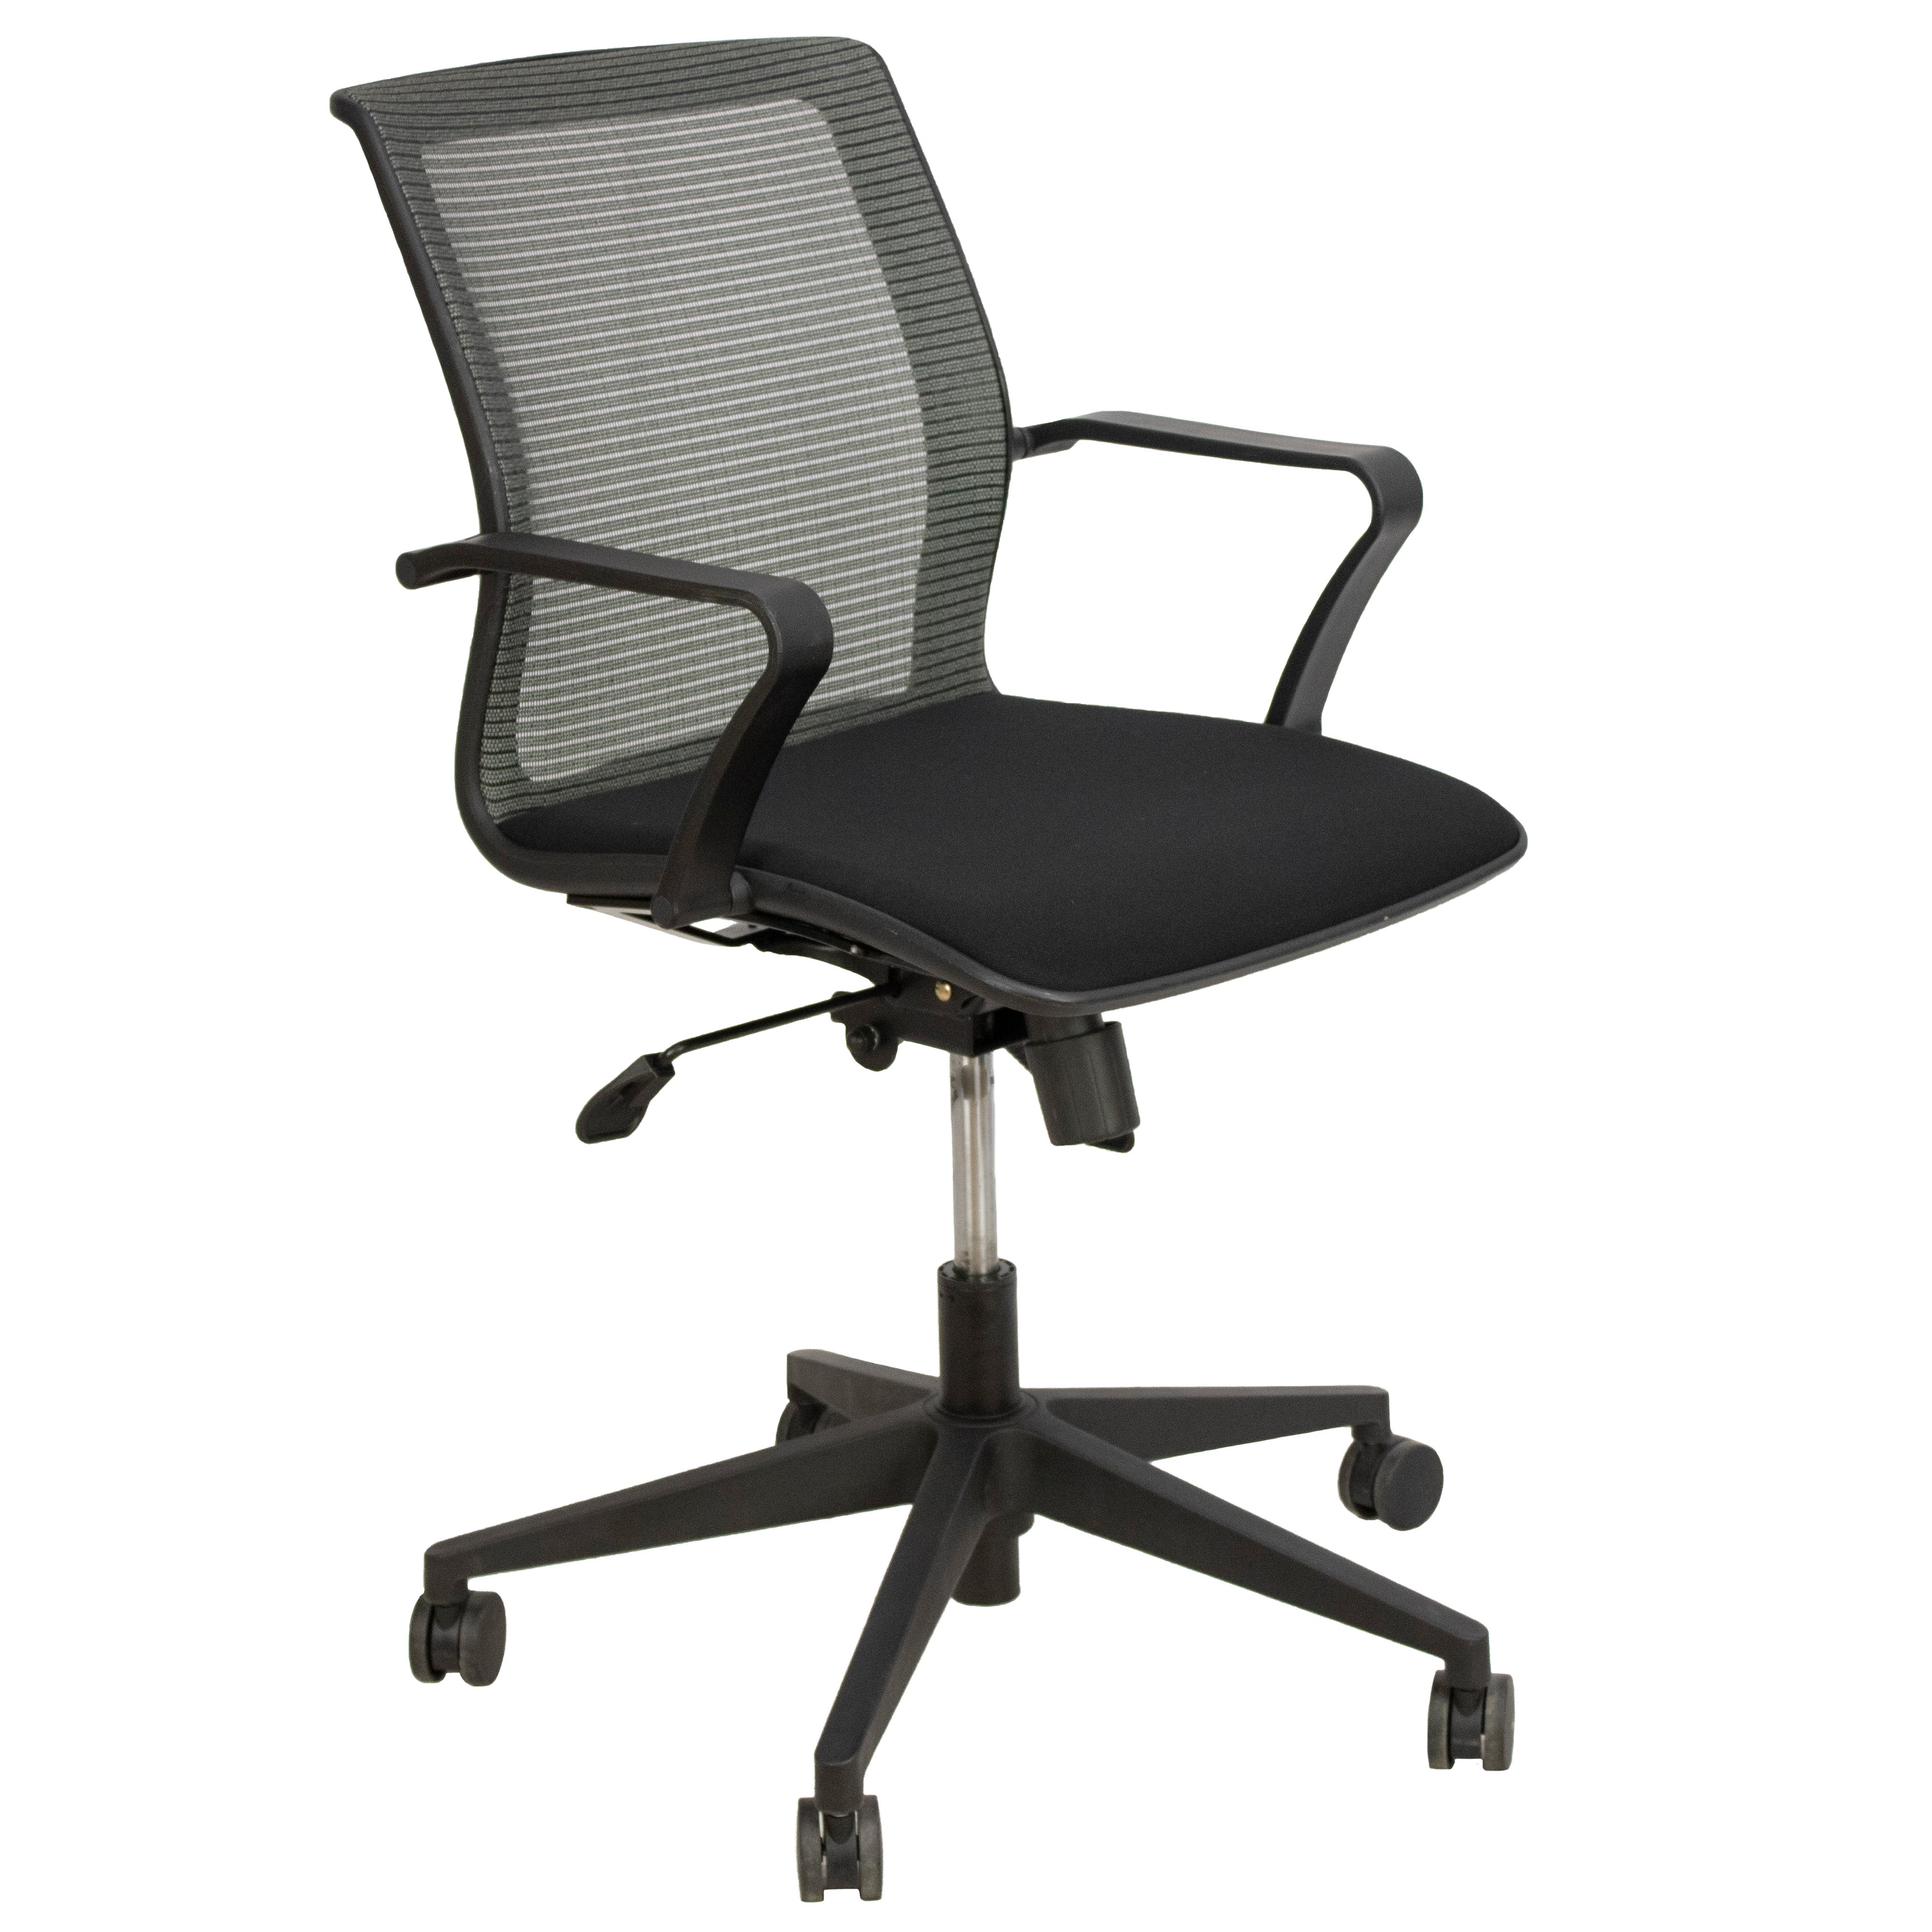 Teal Mesh 2 Function Task Chair - Preowned